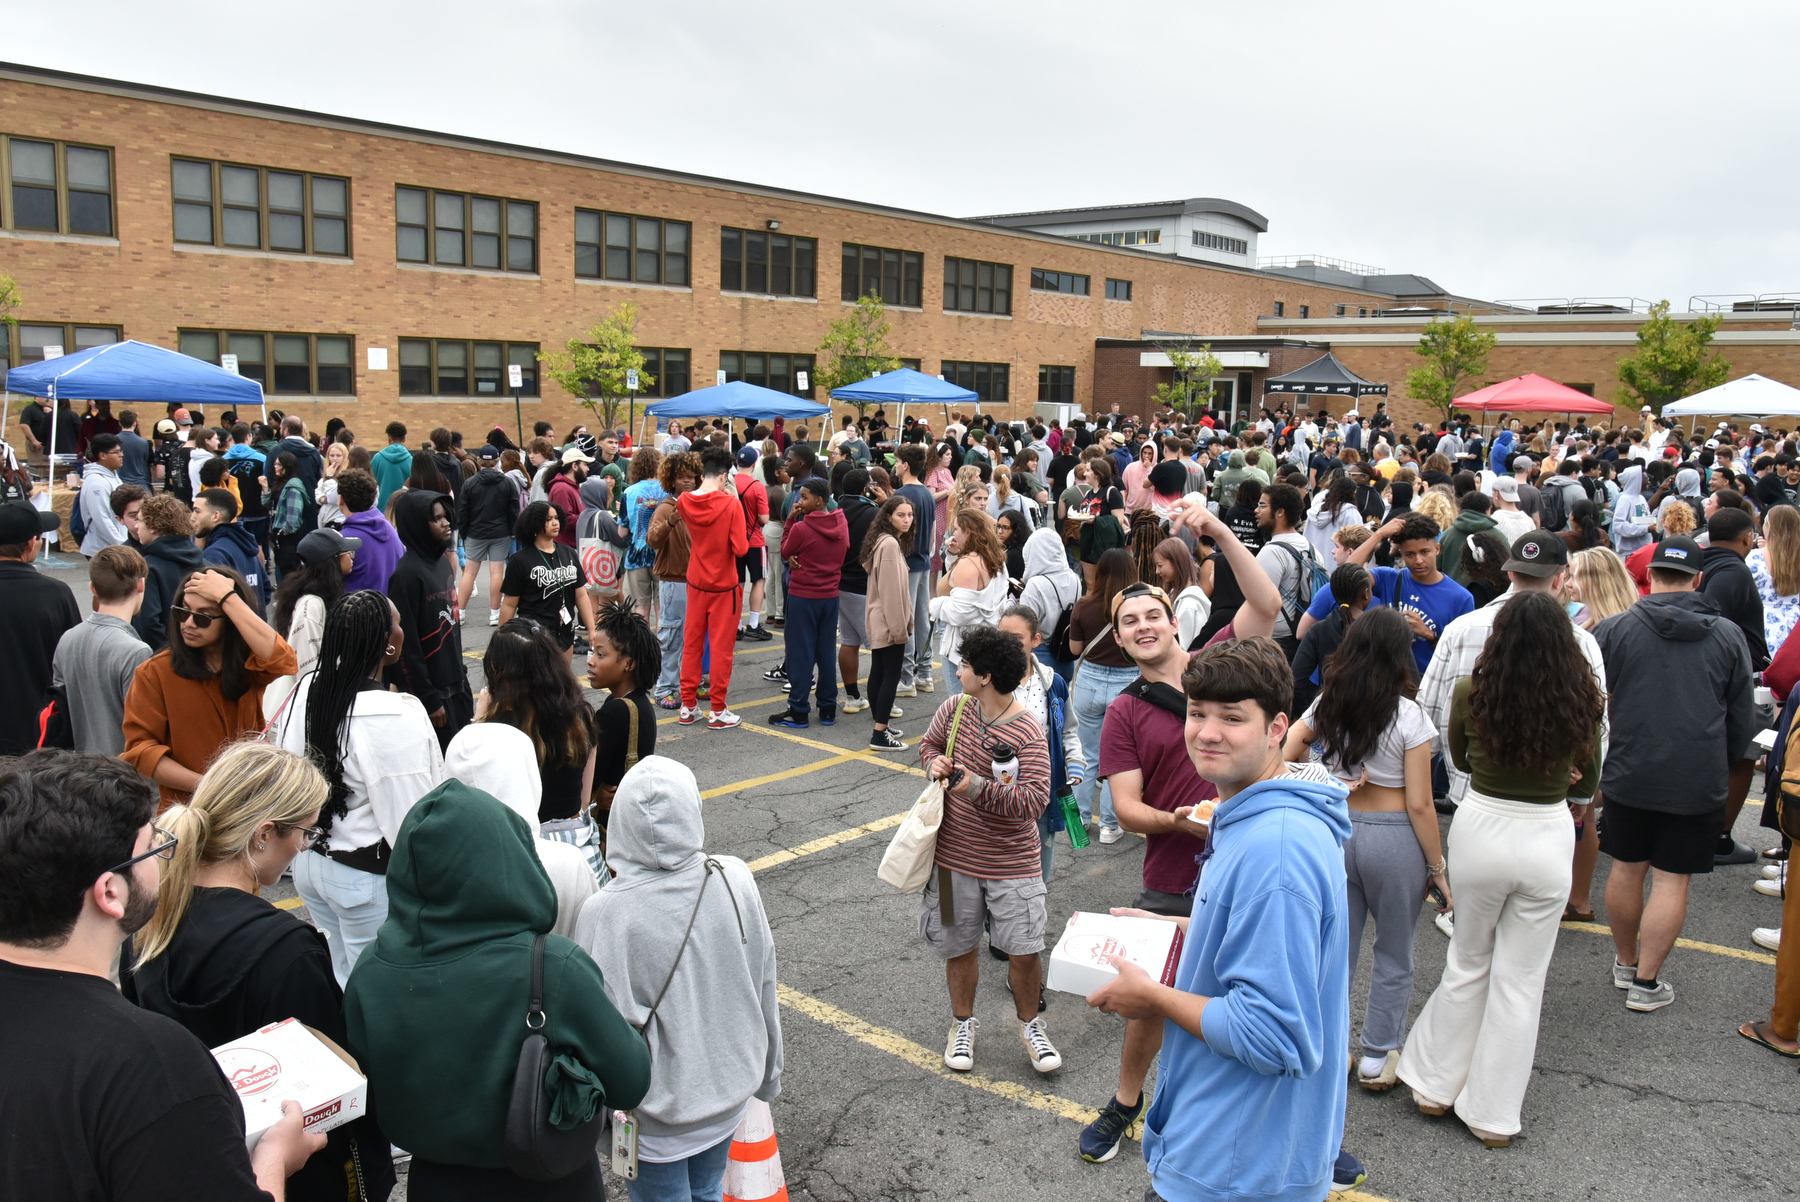 The Taste of Oswego provided the campus community with delicious food samplings from vendors and local restaurants in the greater Oswego area on Aug. 24 in Parking lot E-10 adjacent to Marano Campus Center facing Lake Ontario. 